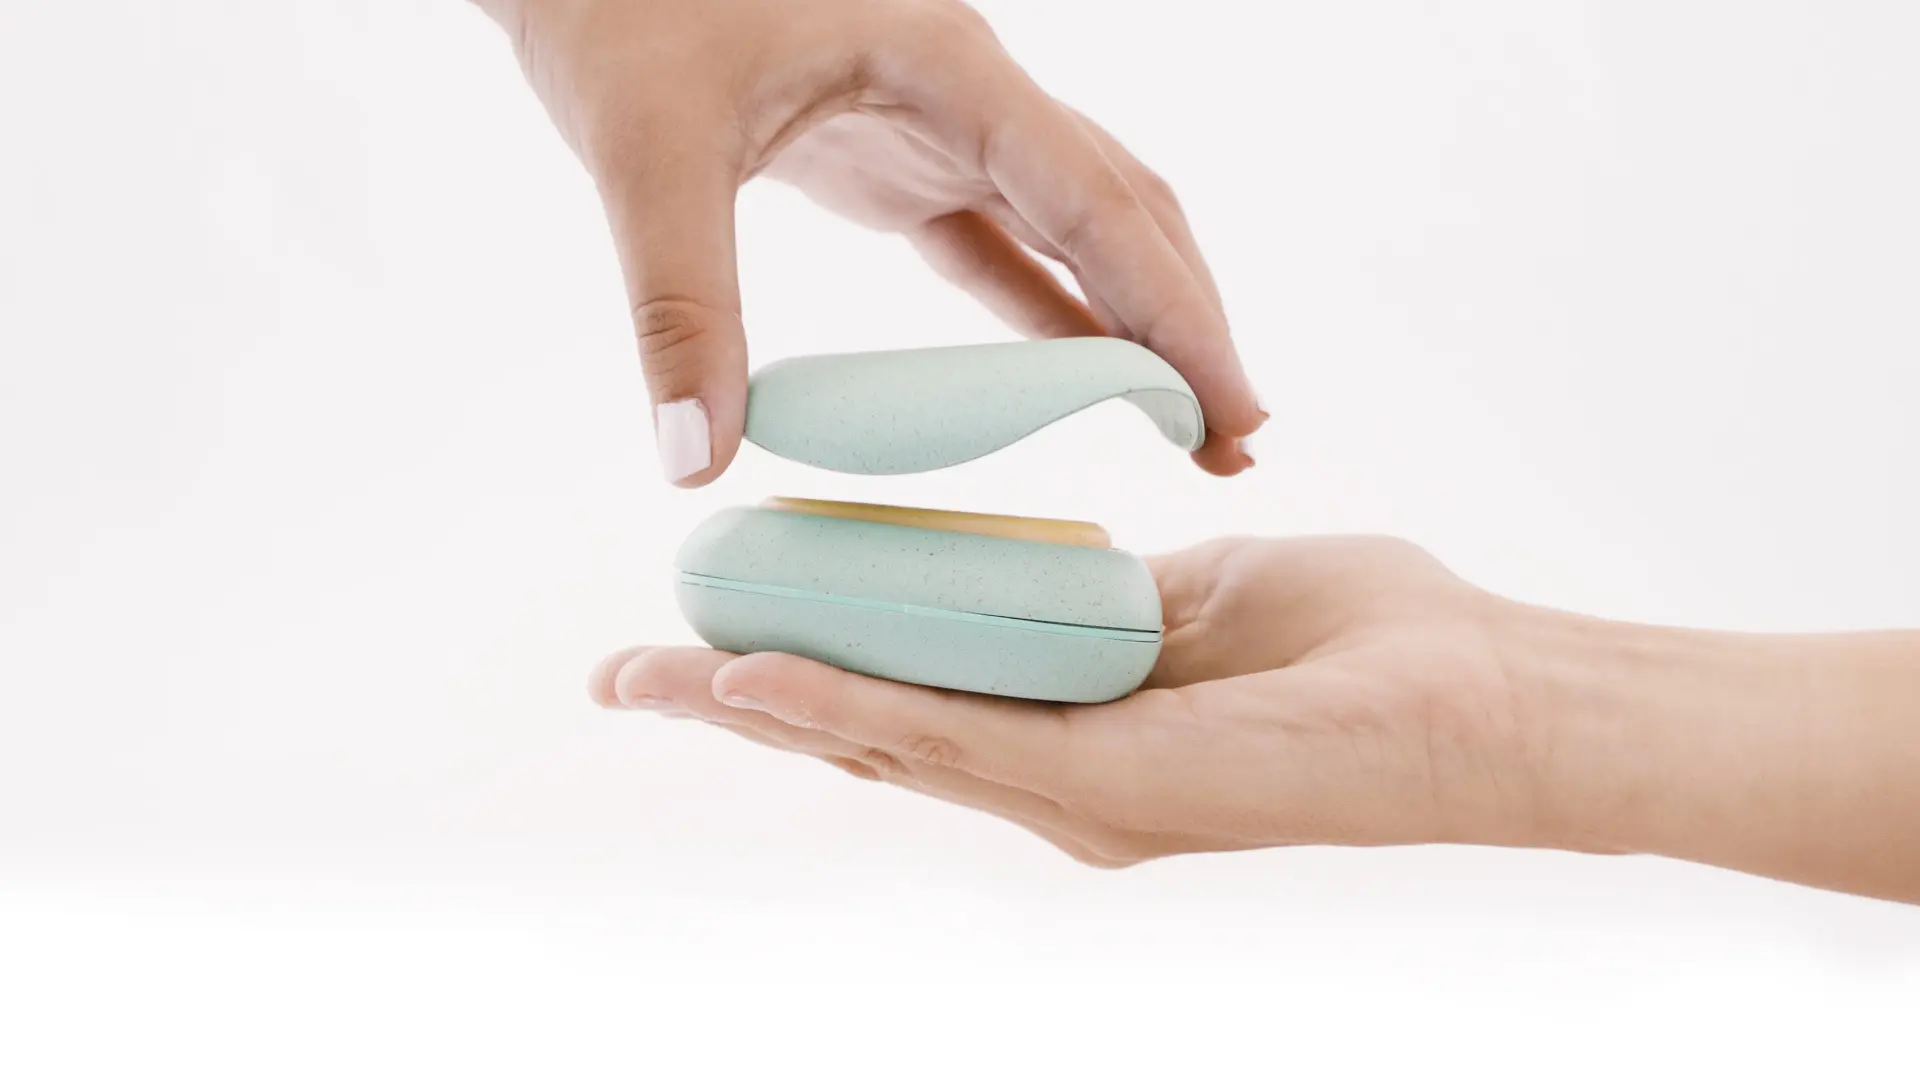 SolidPod unique gel and shampoo applicator made from recycled elements